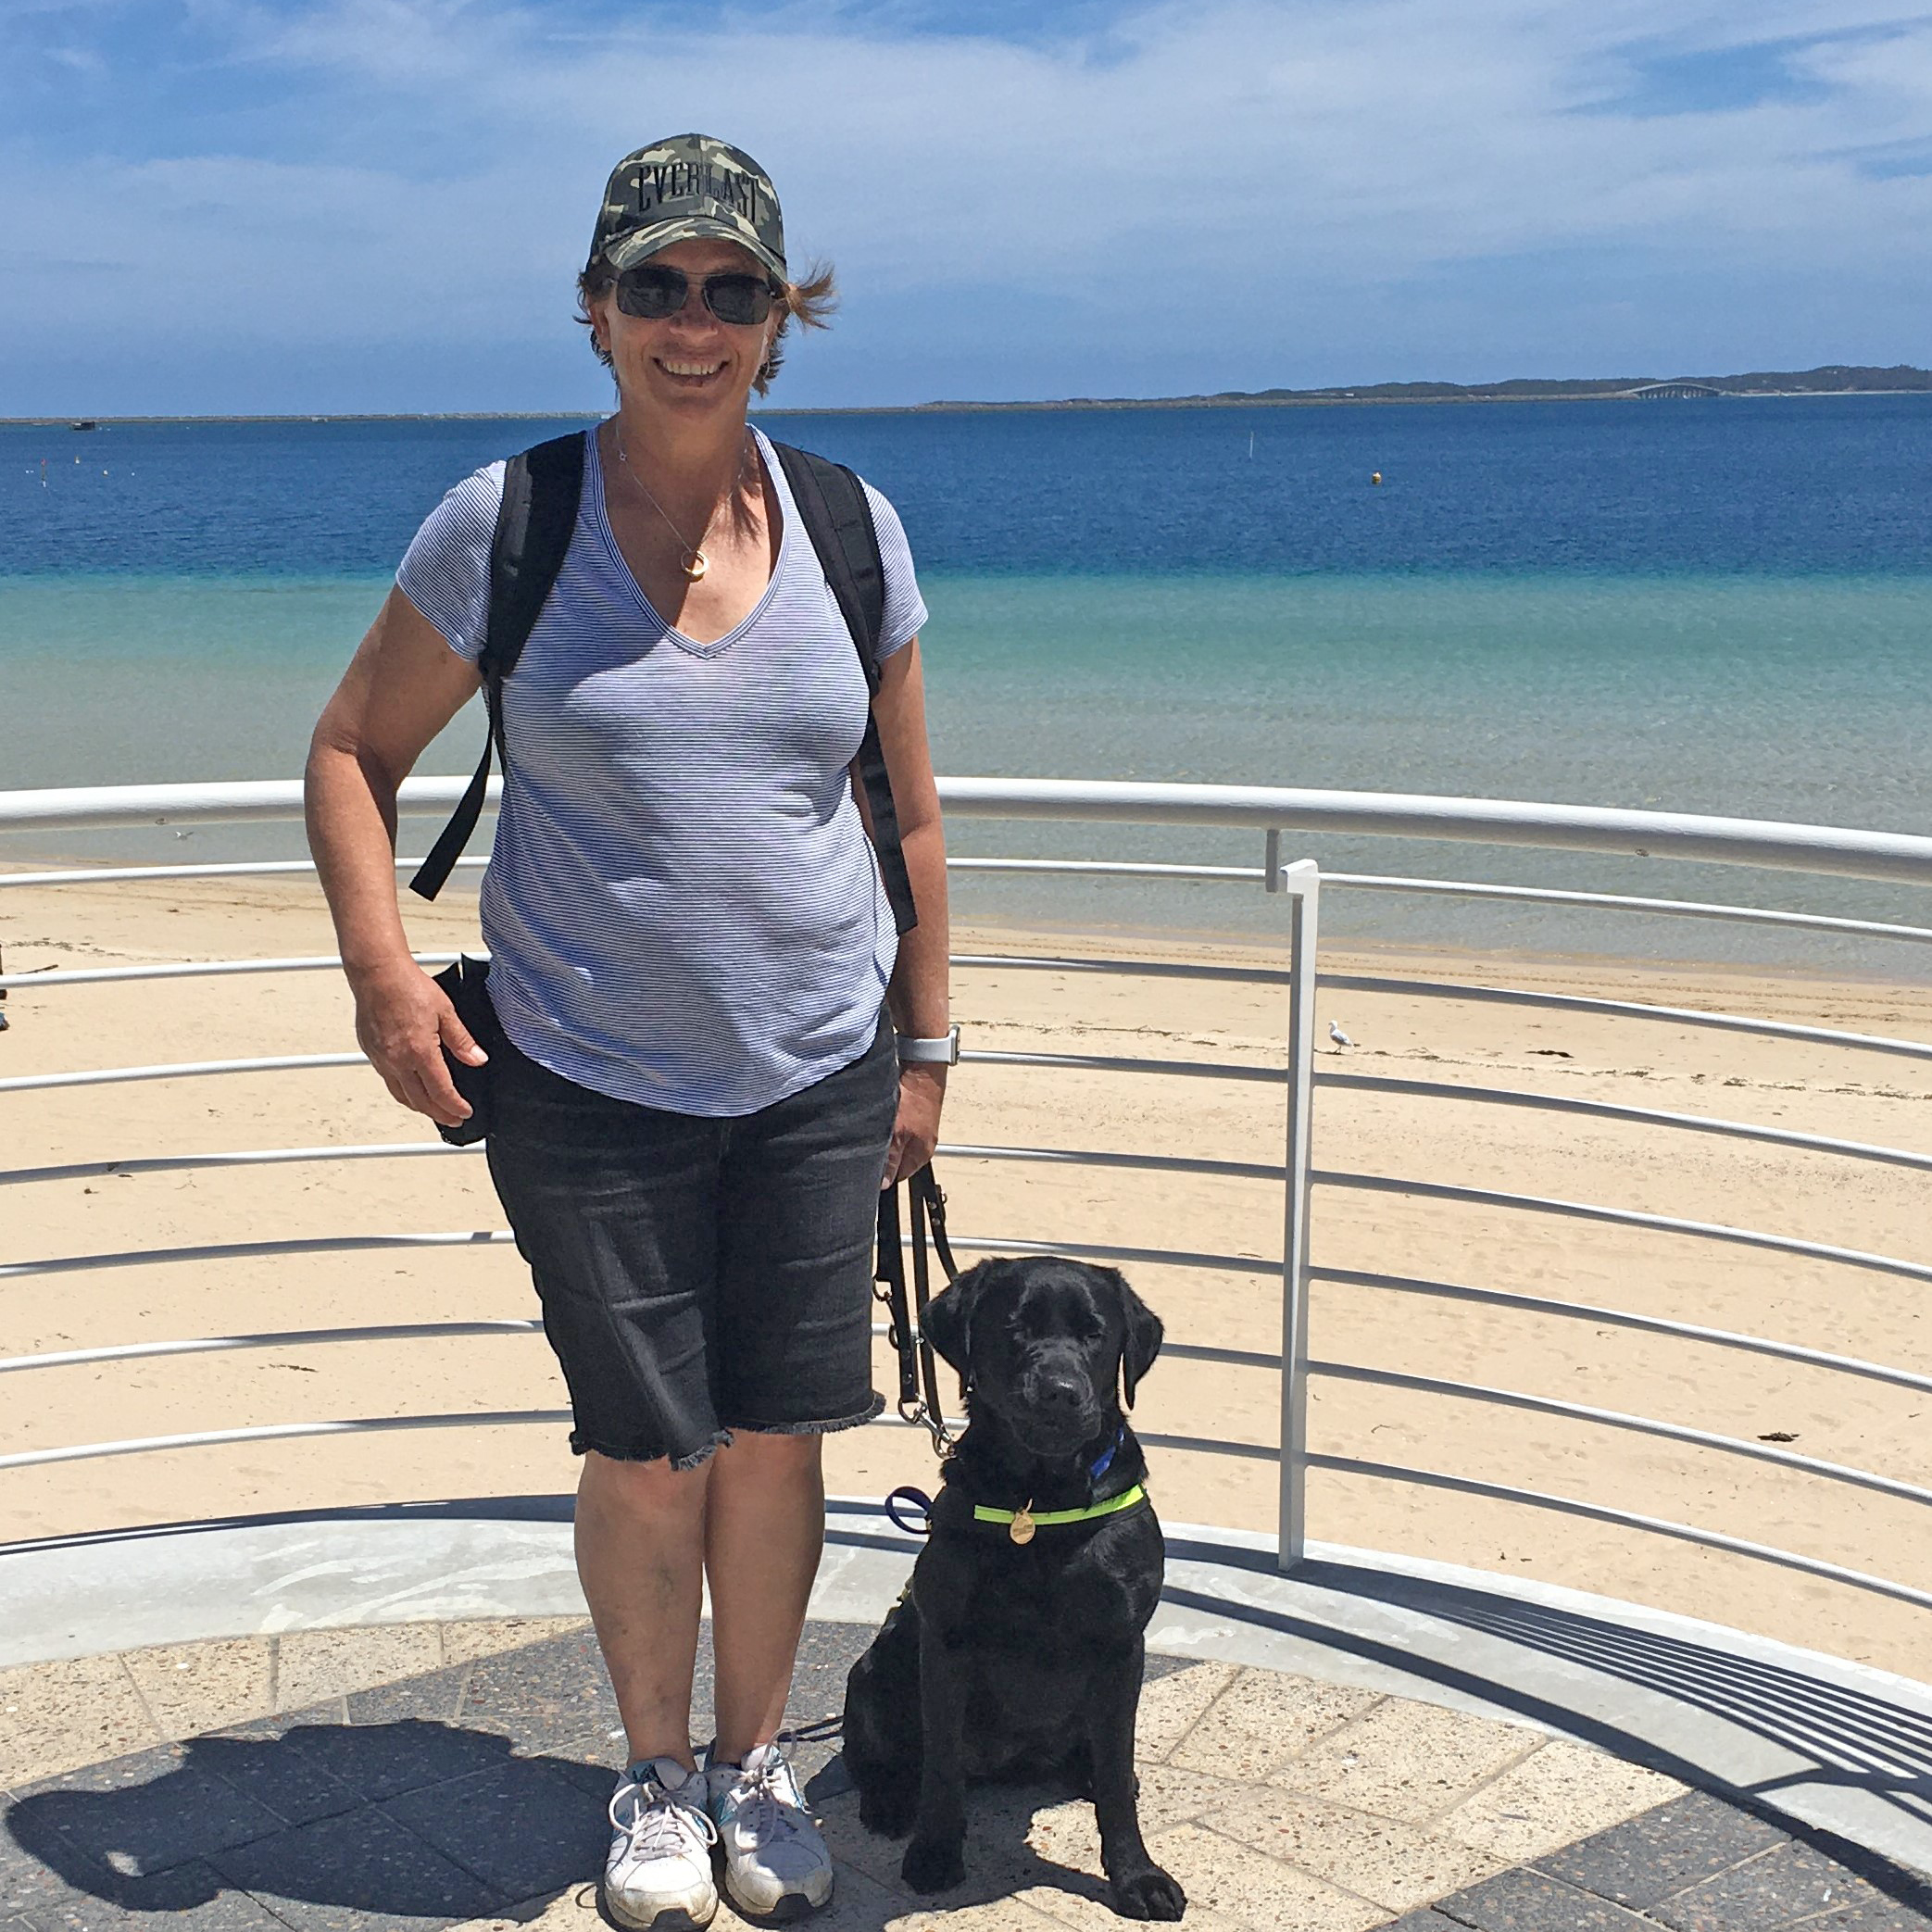 Libby and Buffy the Seeing Eye Dog standing together at the beach